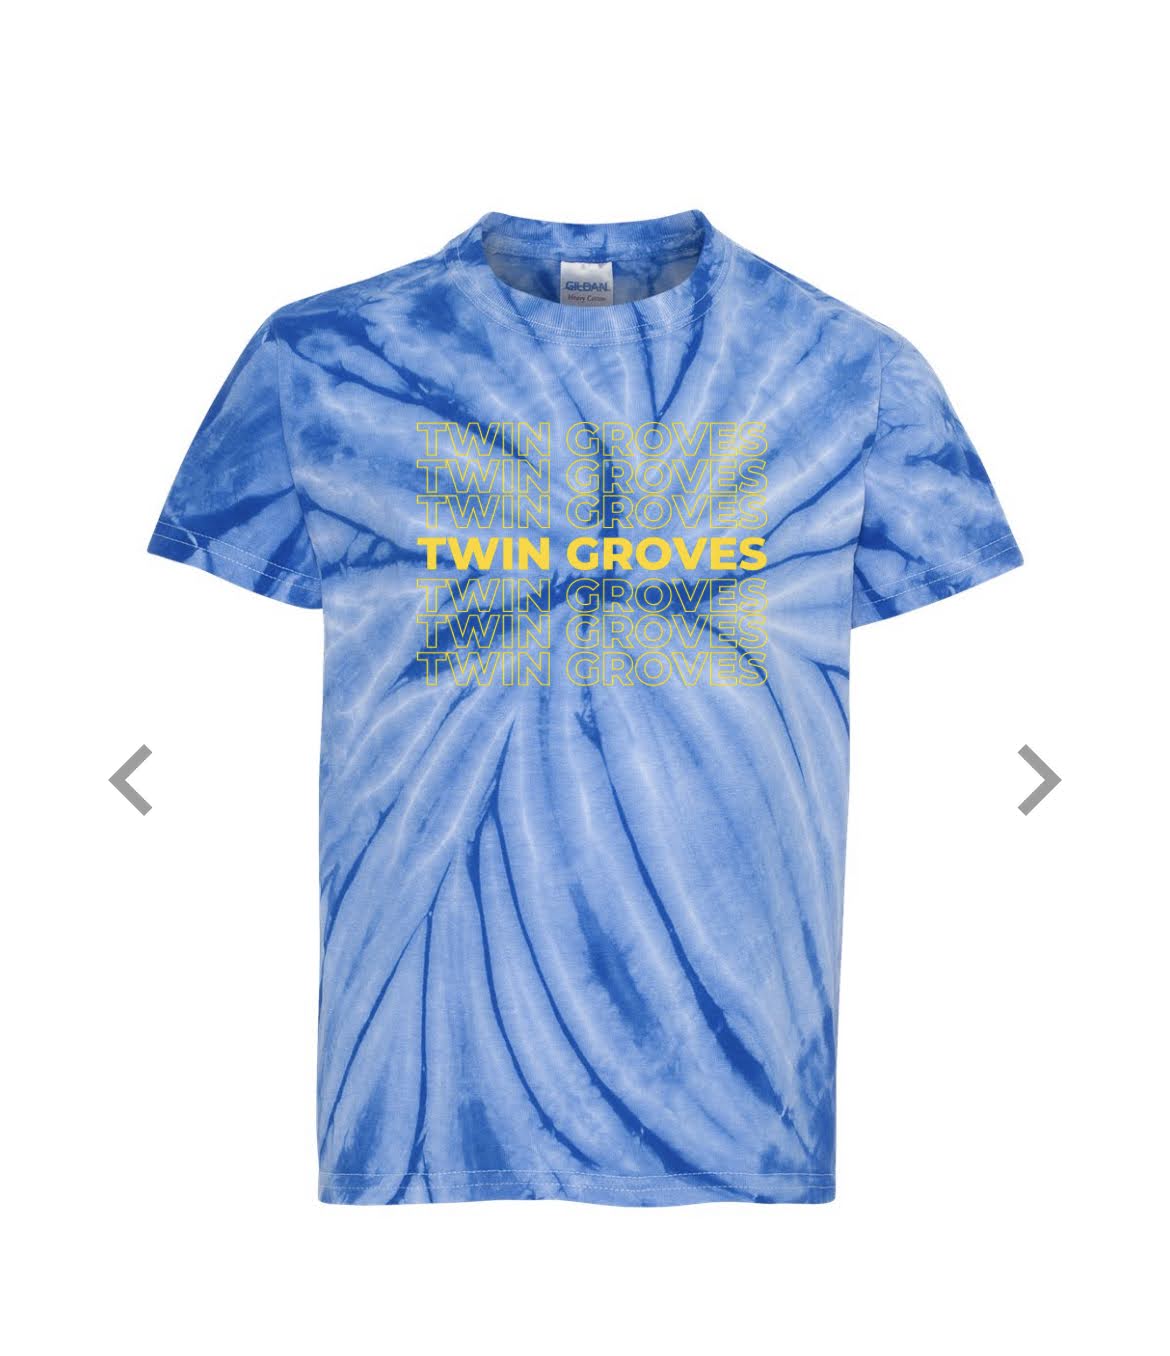 Twin Groves MS Spirit Wear Now Available